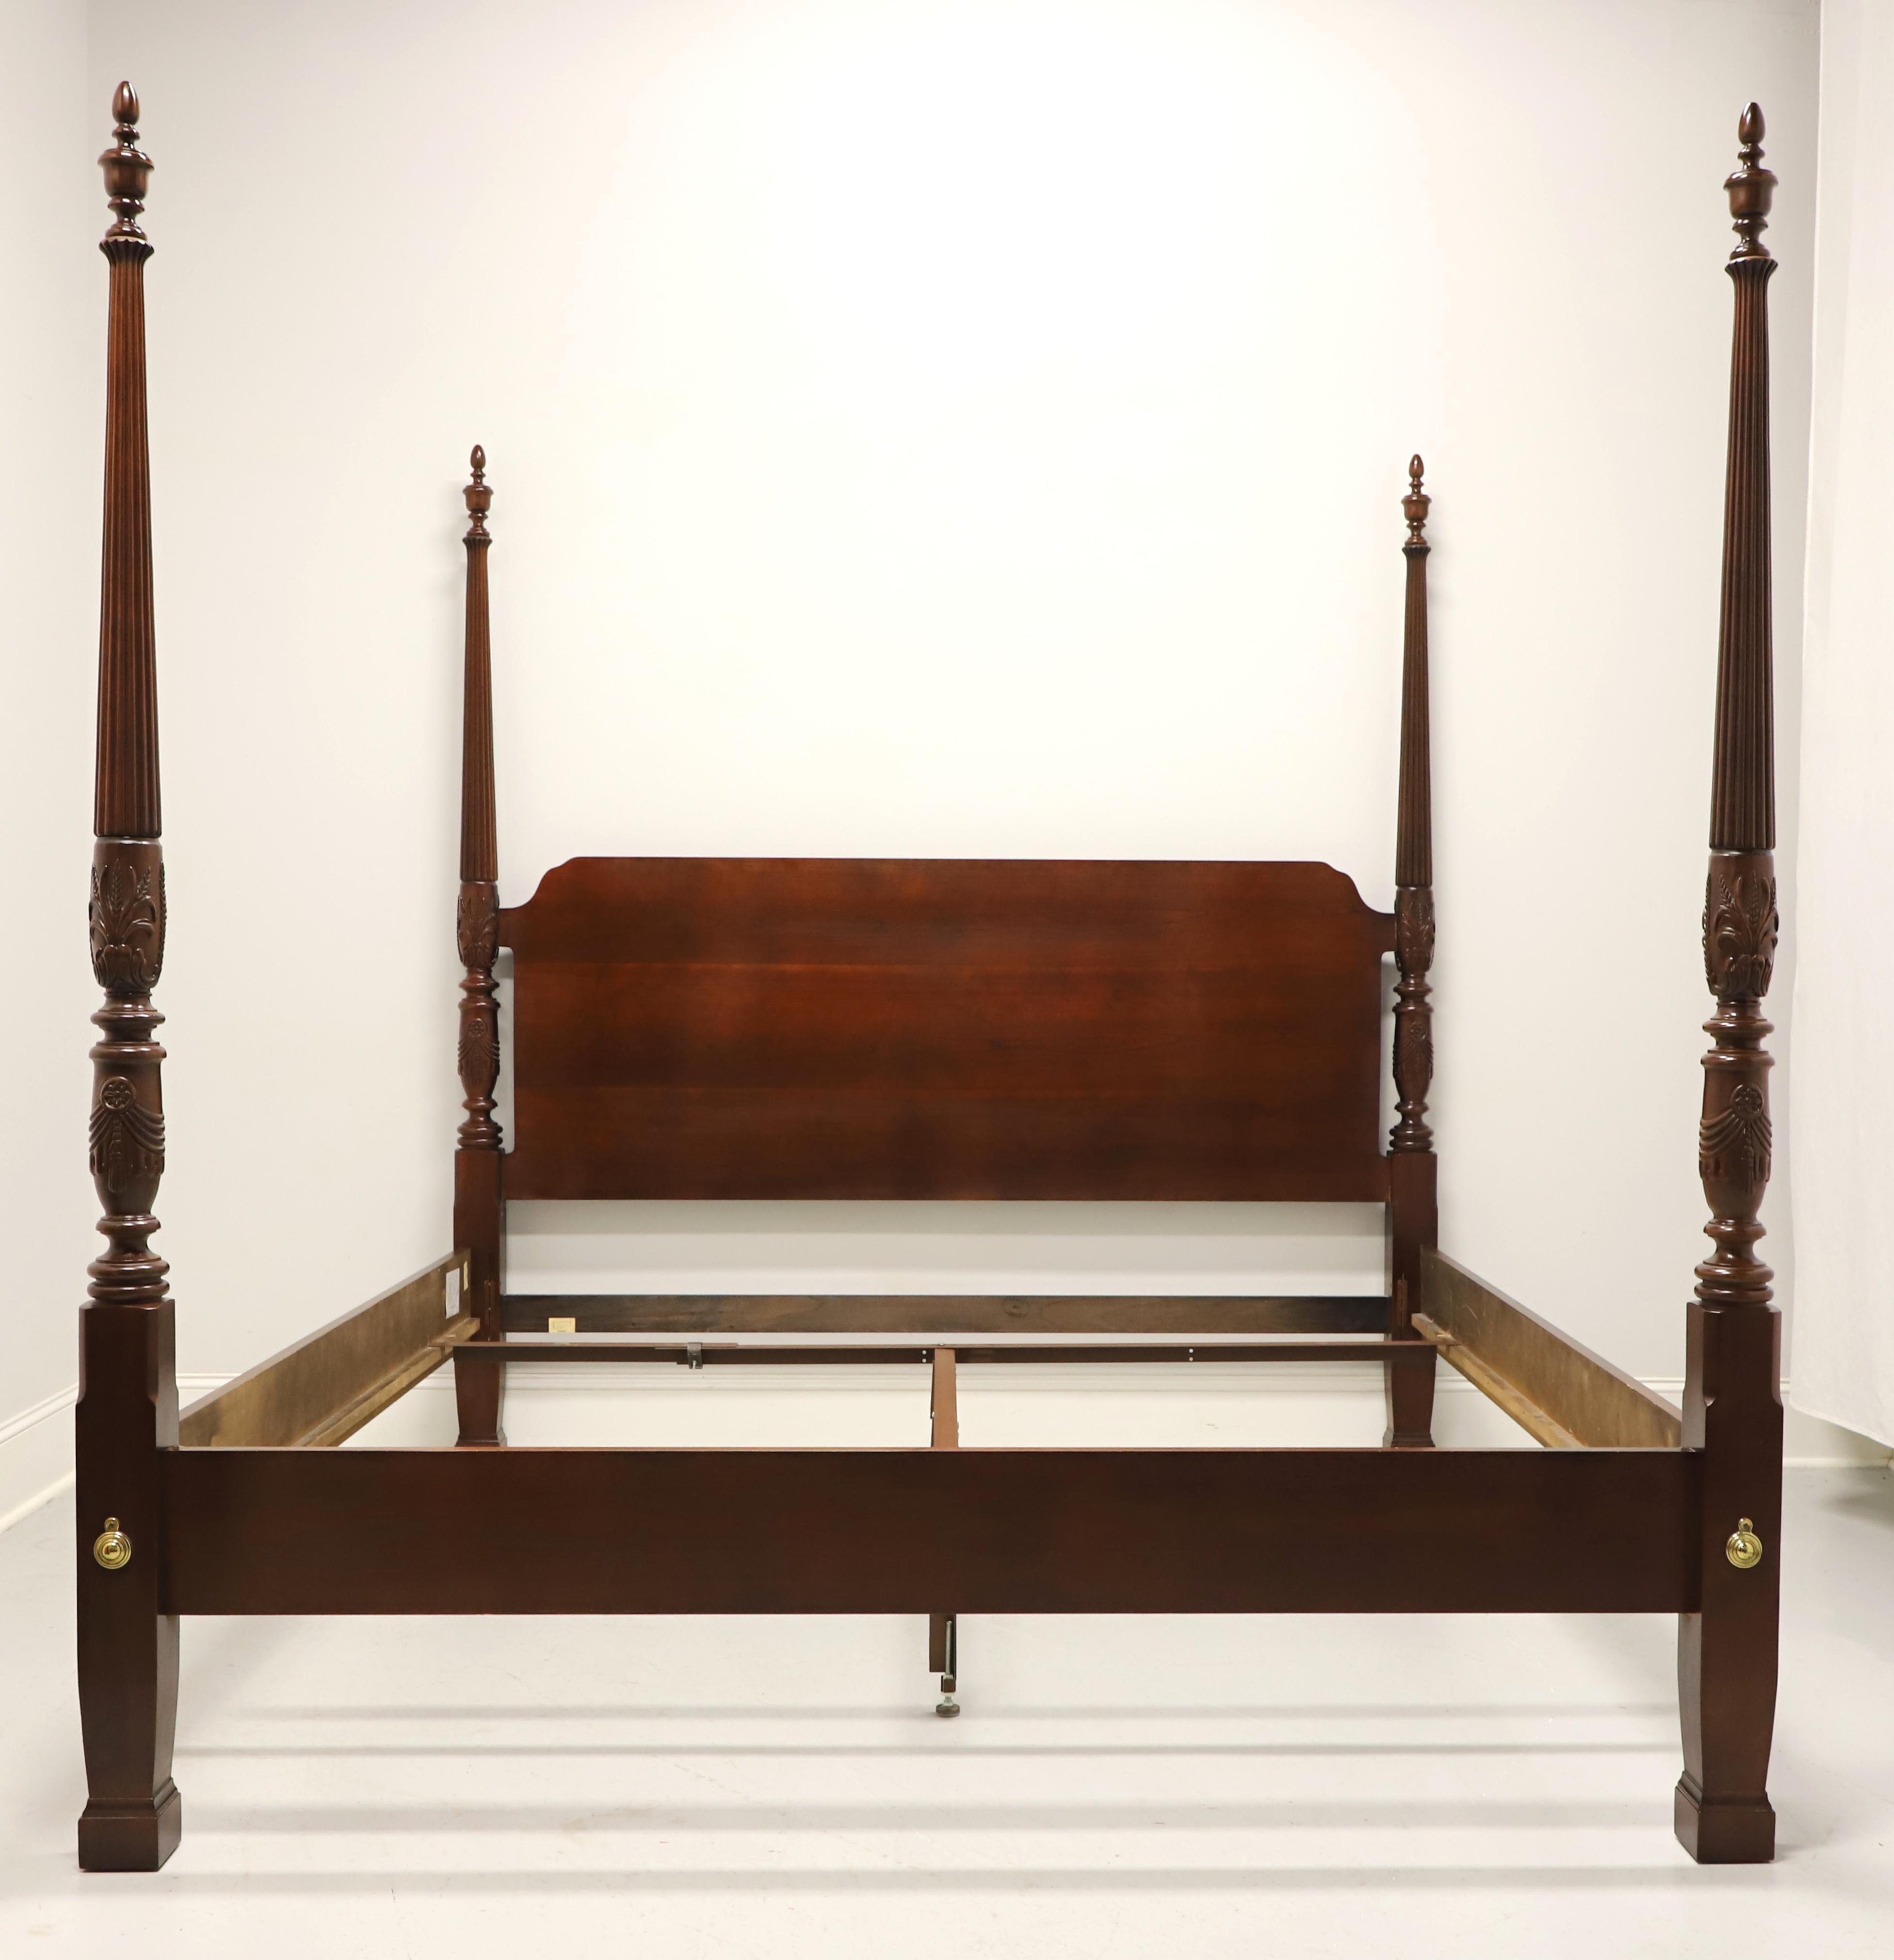 A Chippendale style king Size rice carved poster bed by Thomasville, from their Collectors Cherry Collection. Cherry wood with carved arch headboard, four rice carved posts capped by large finials, clip held side rails with wooden mattress supports,